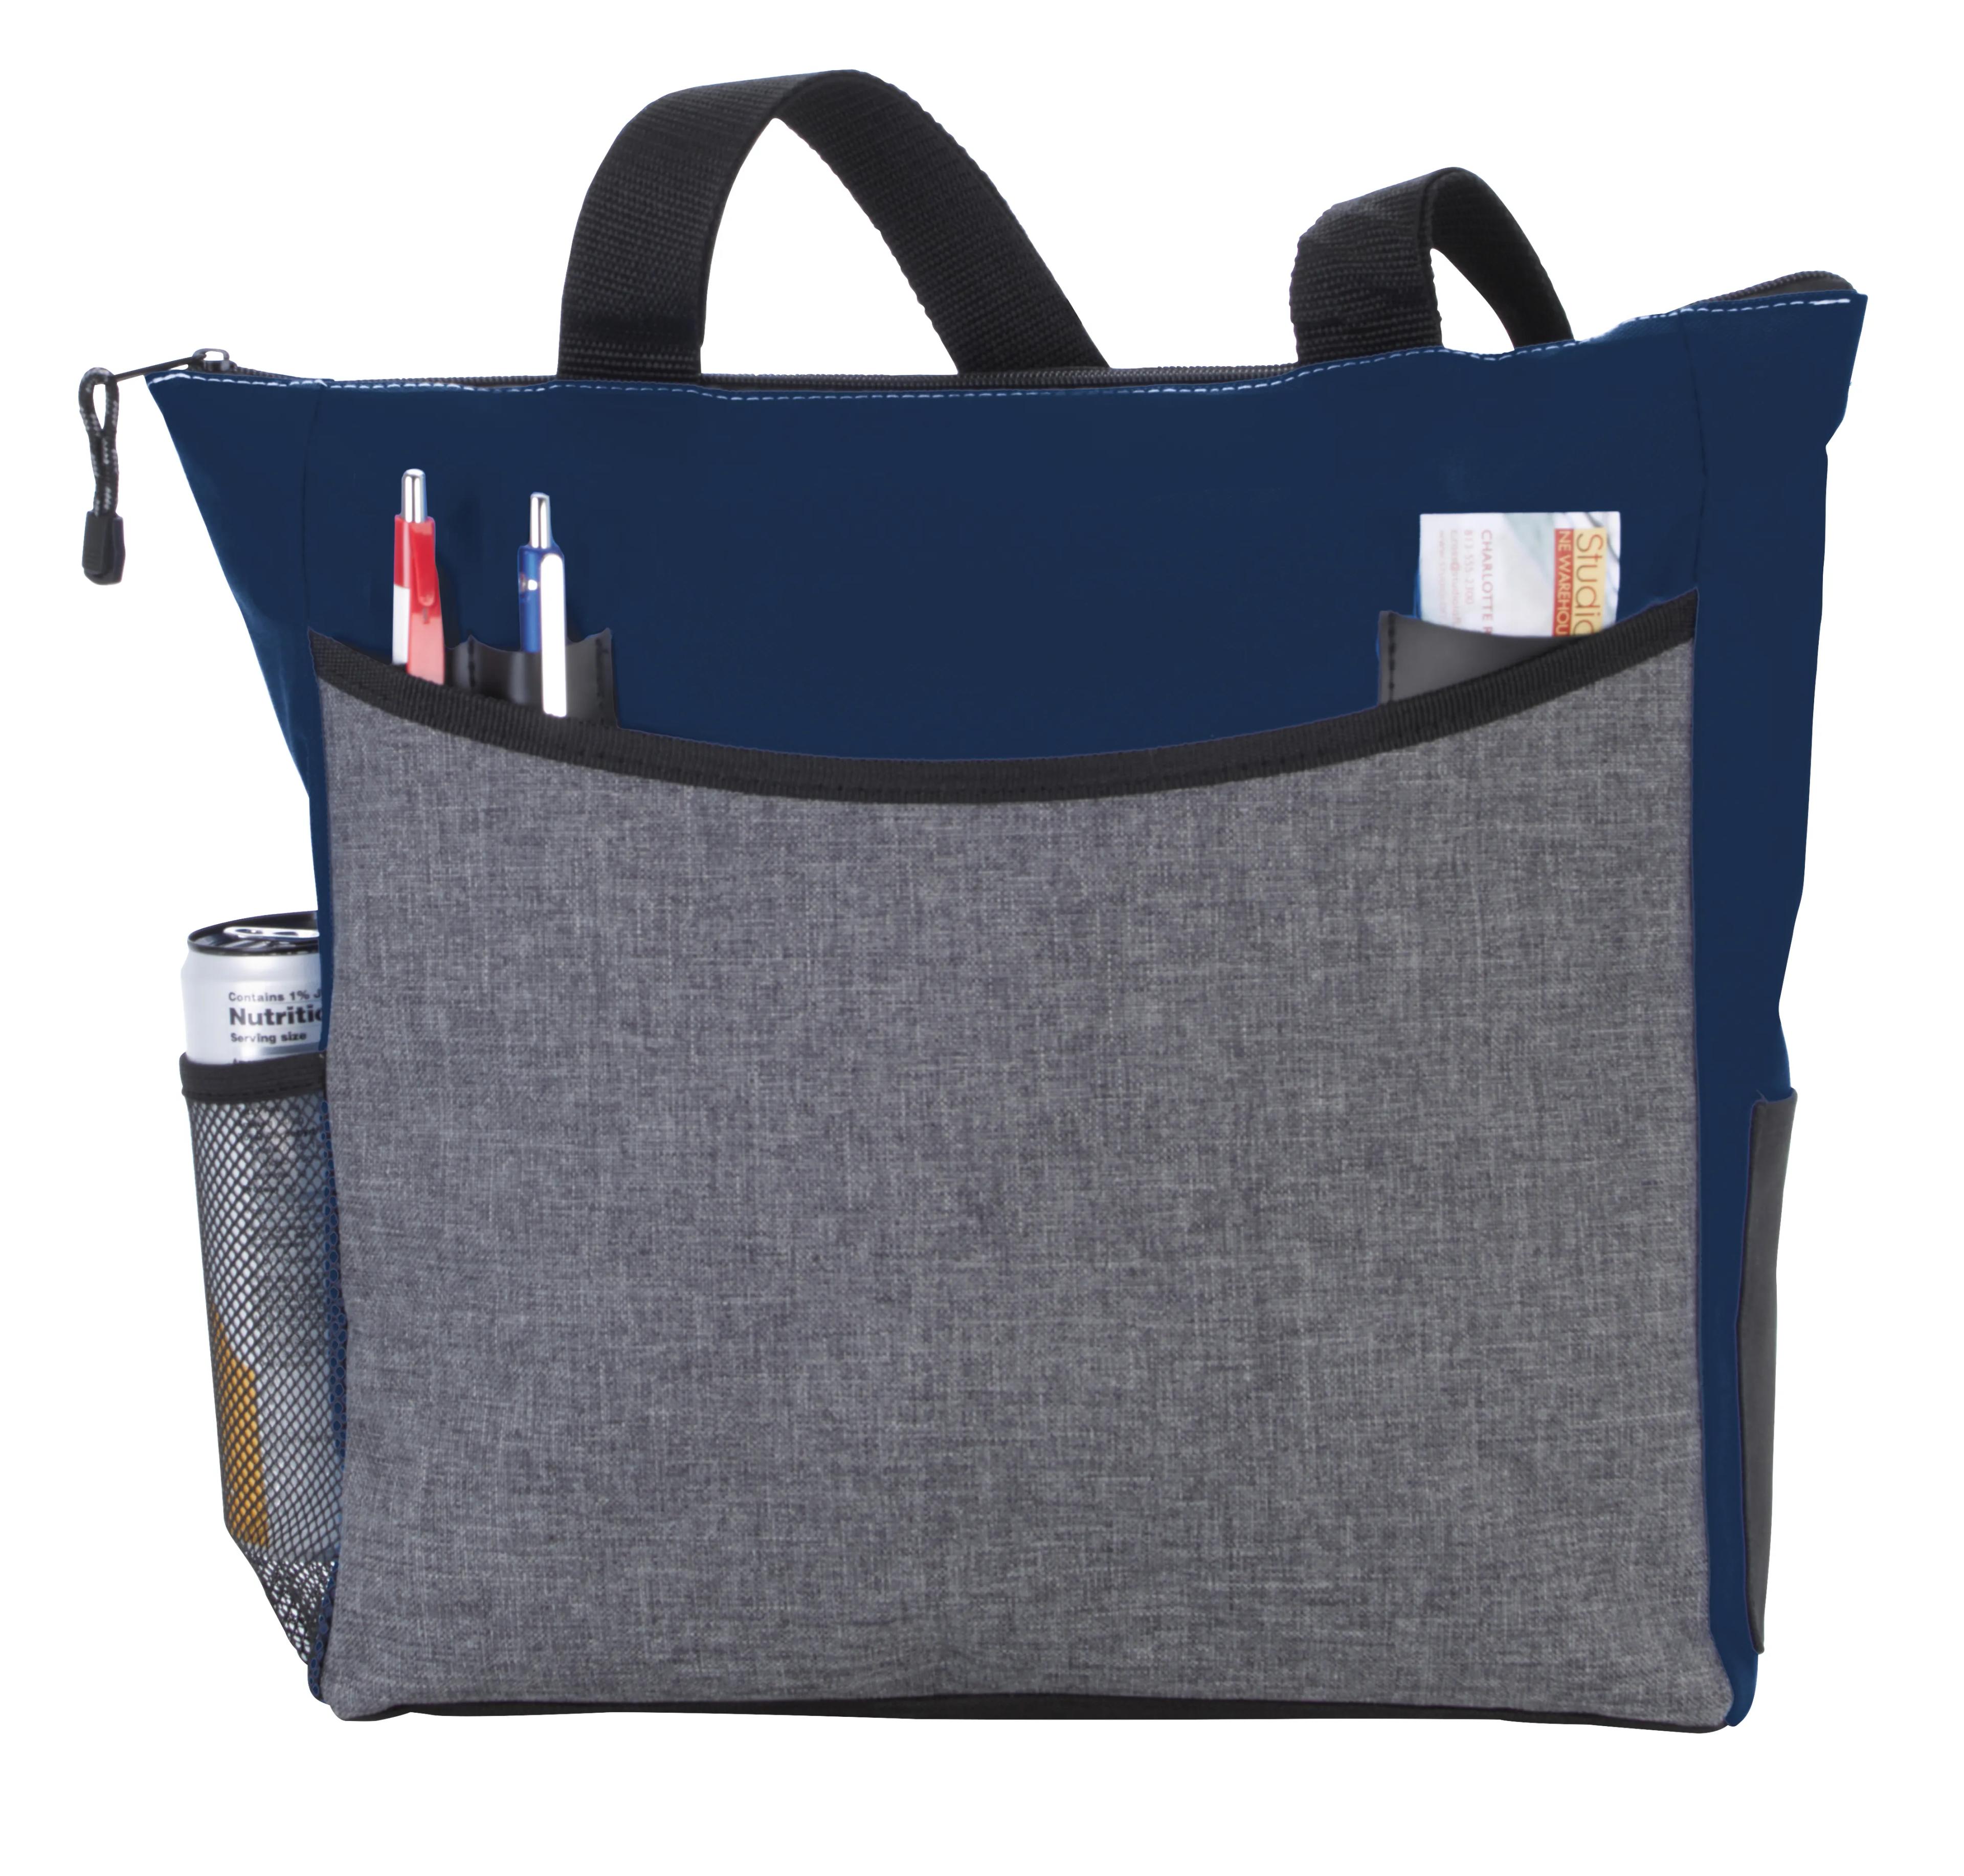 Two-Tone TranSport It Tote 16 of 29